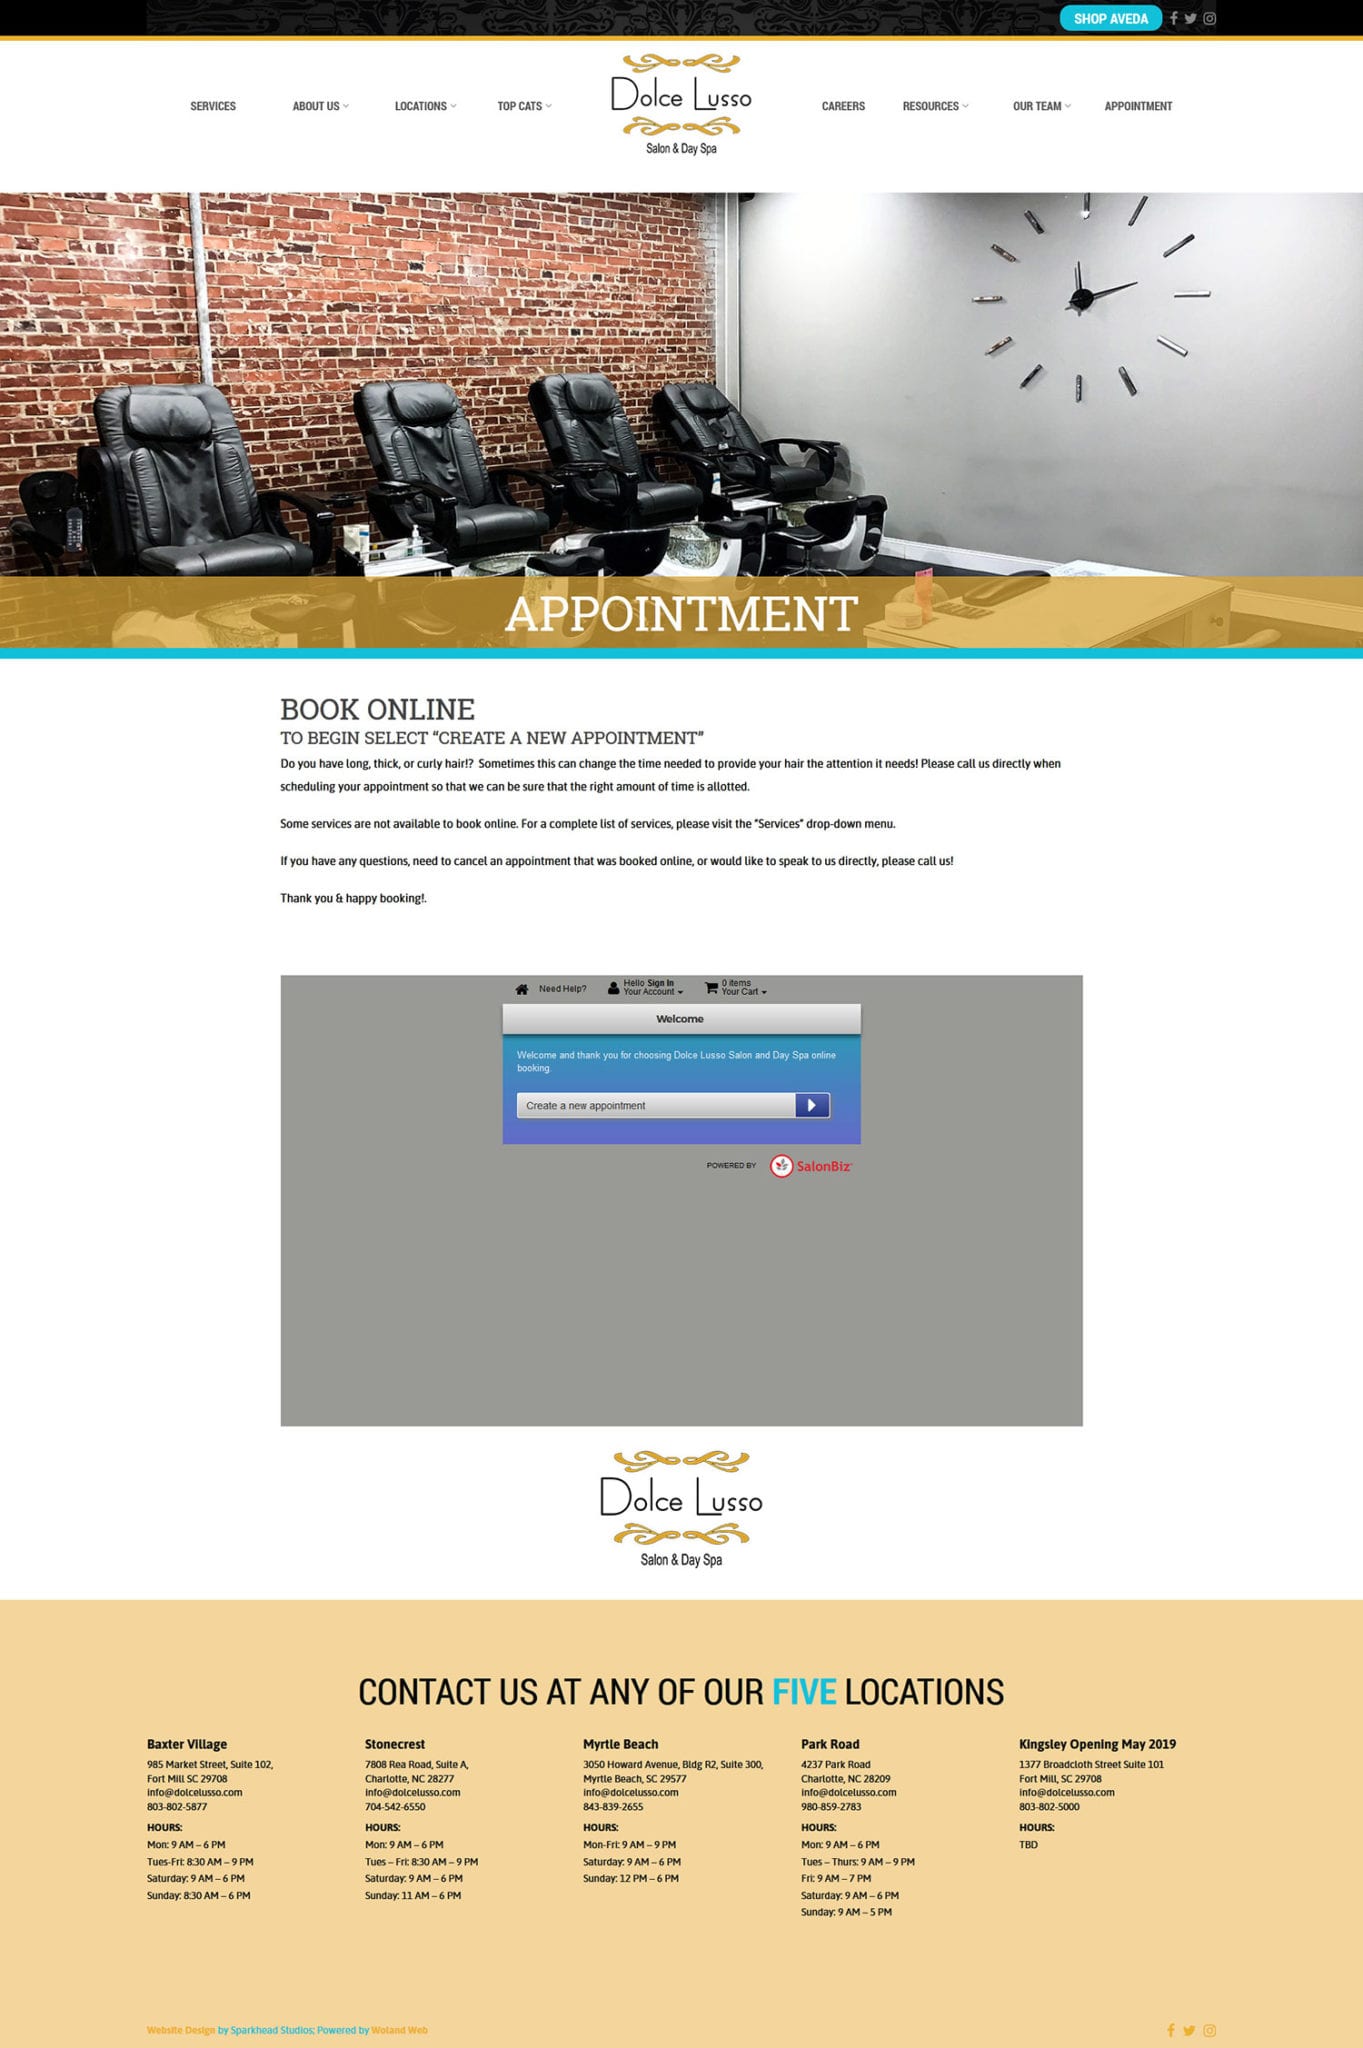 Dolce Lusso website appointment page screenshot